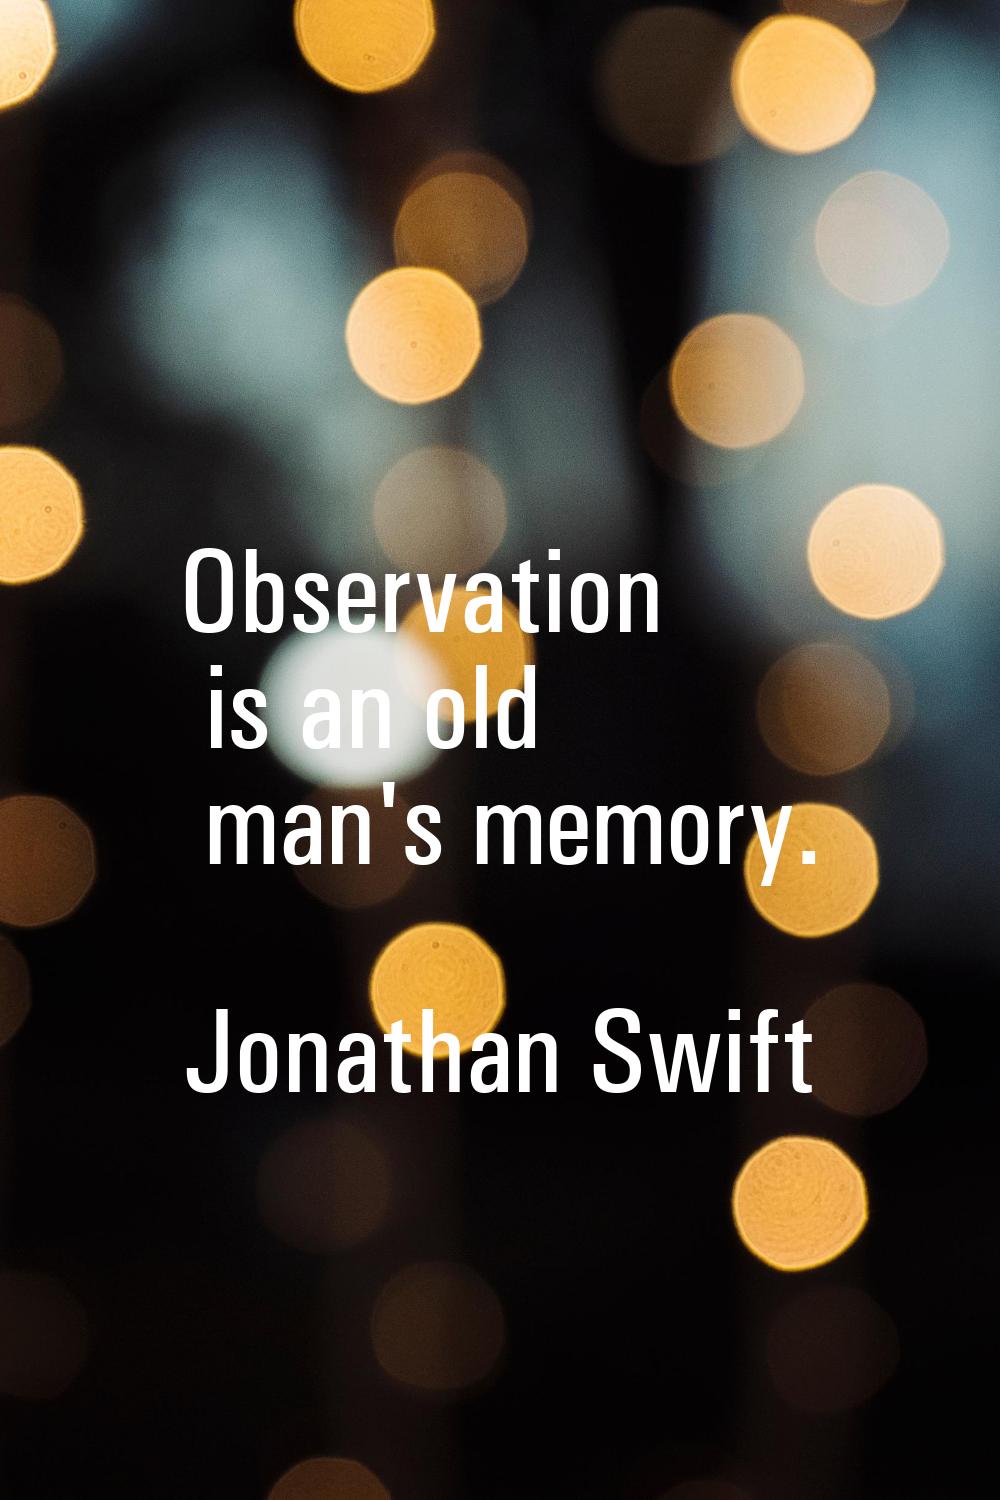 Observation is an old man's memory.